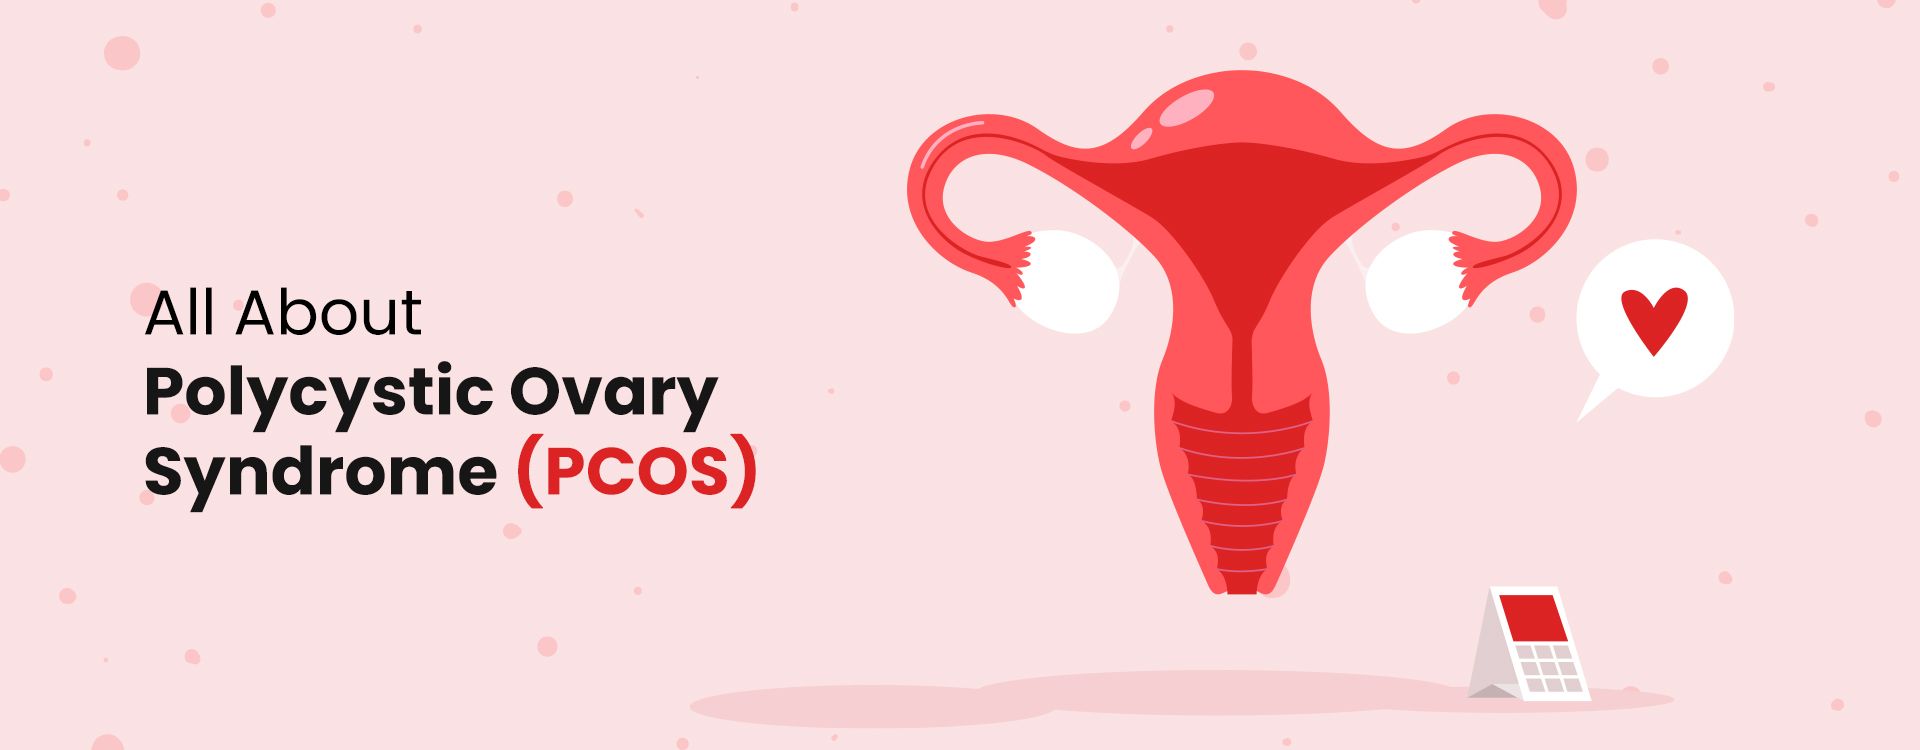 All About Polycystic Ovary Syndrome (PCOS)